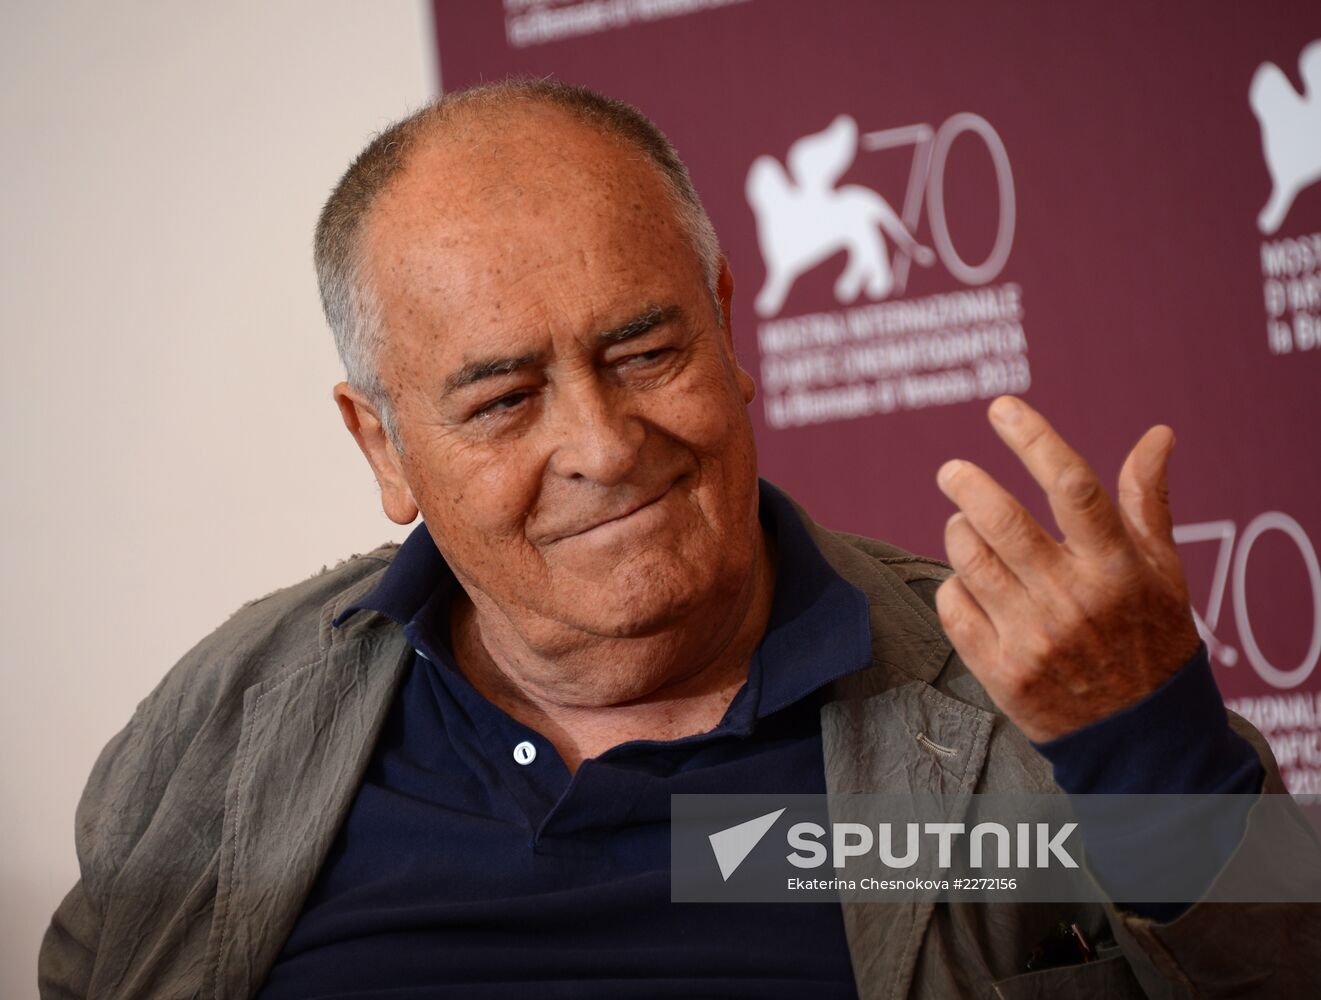 Venice Film Festival. Photocall for actors and film directors